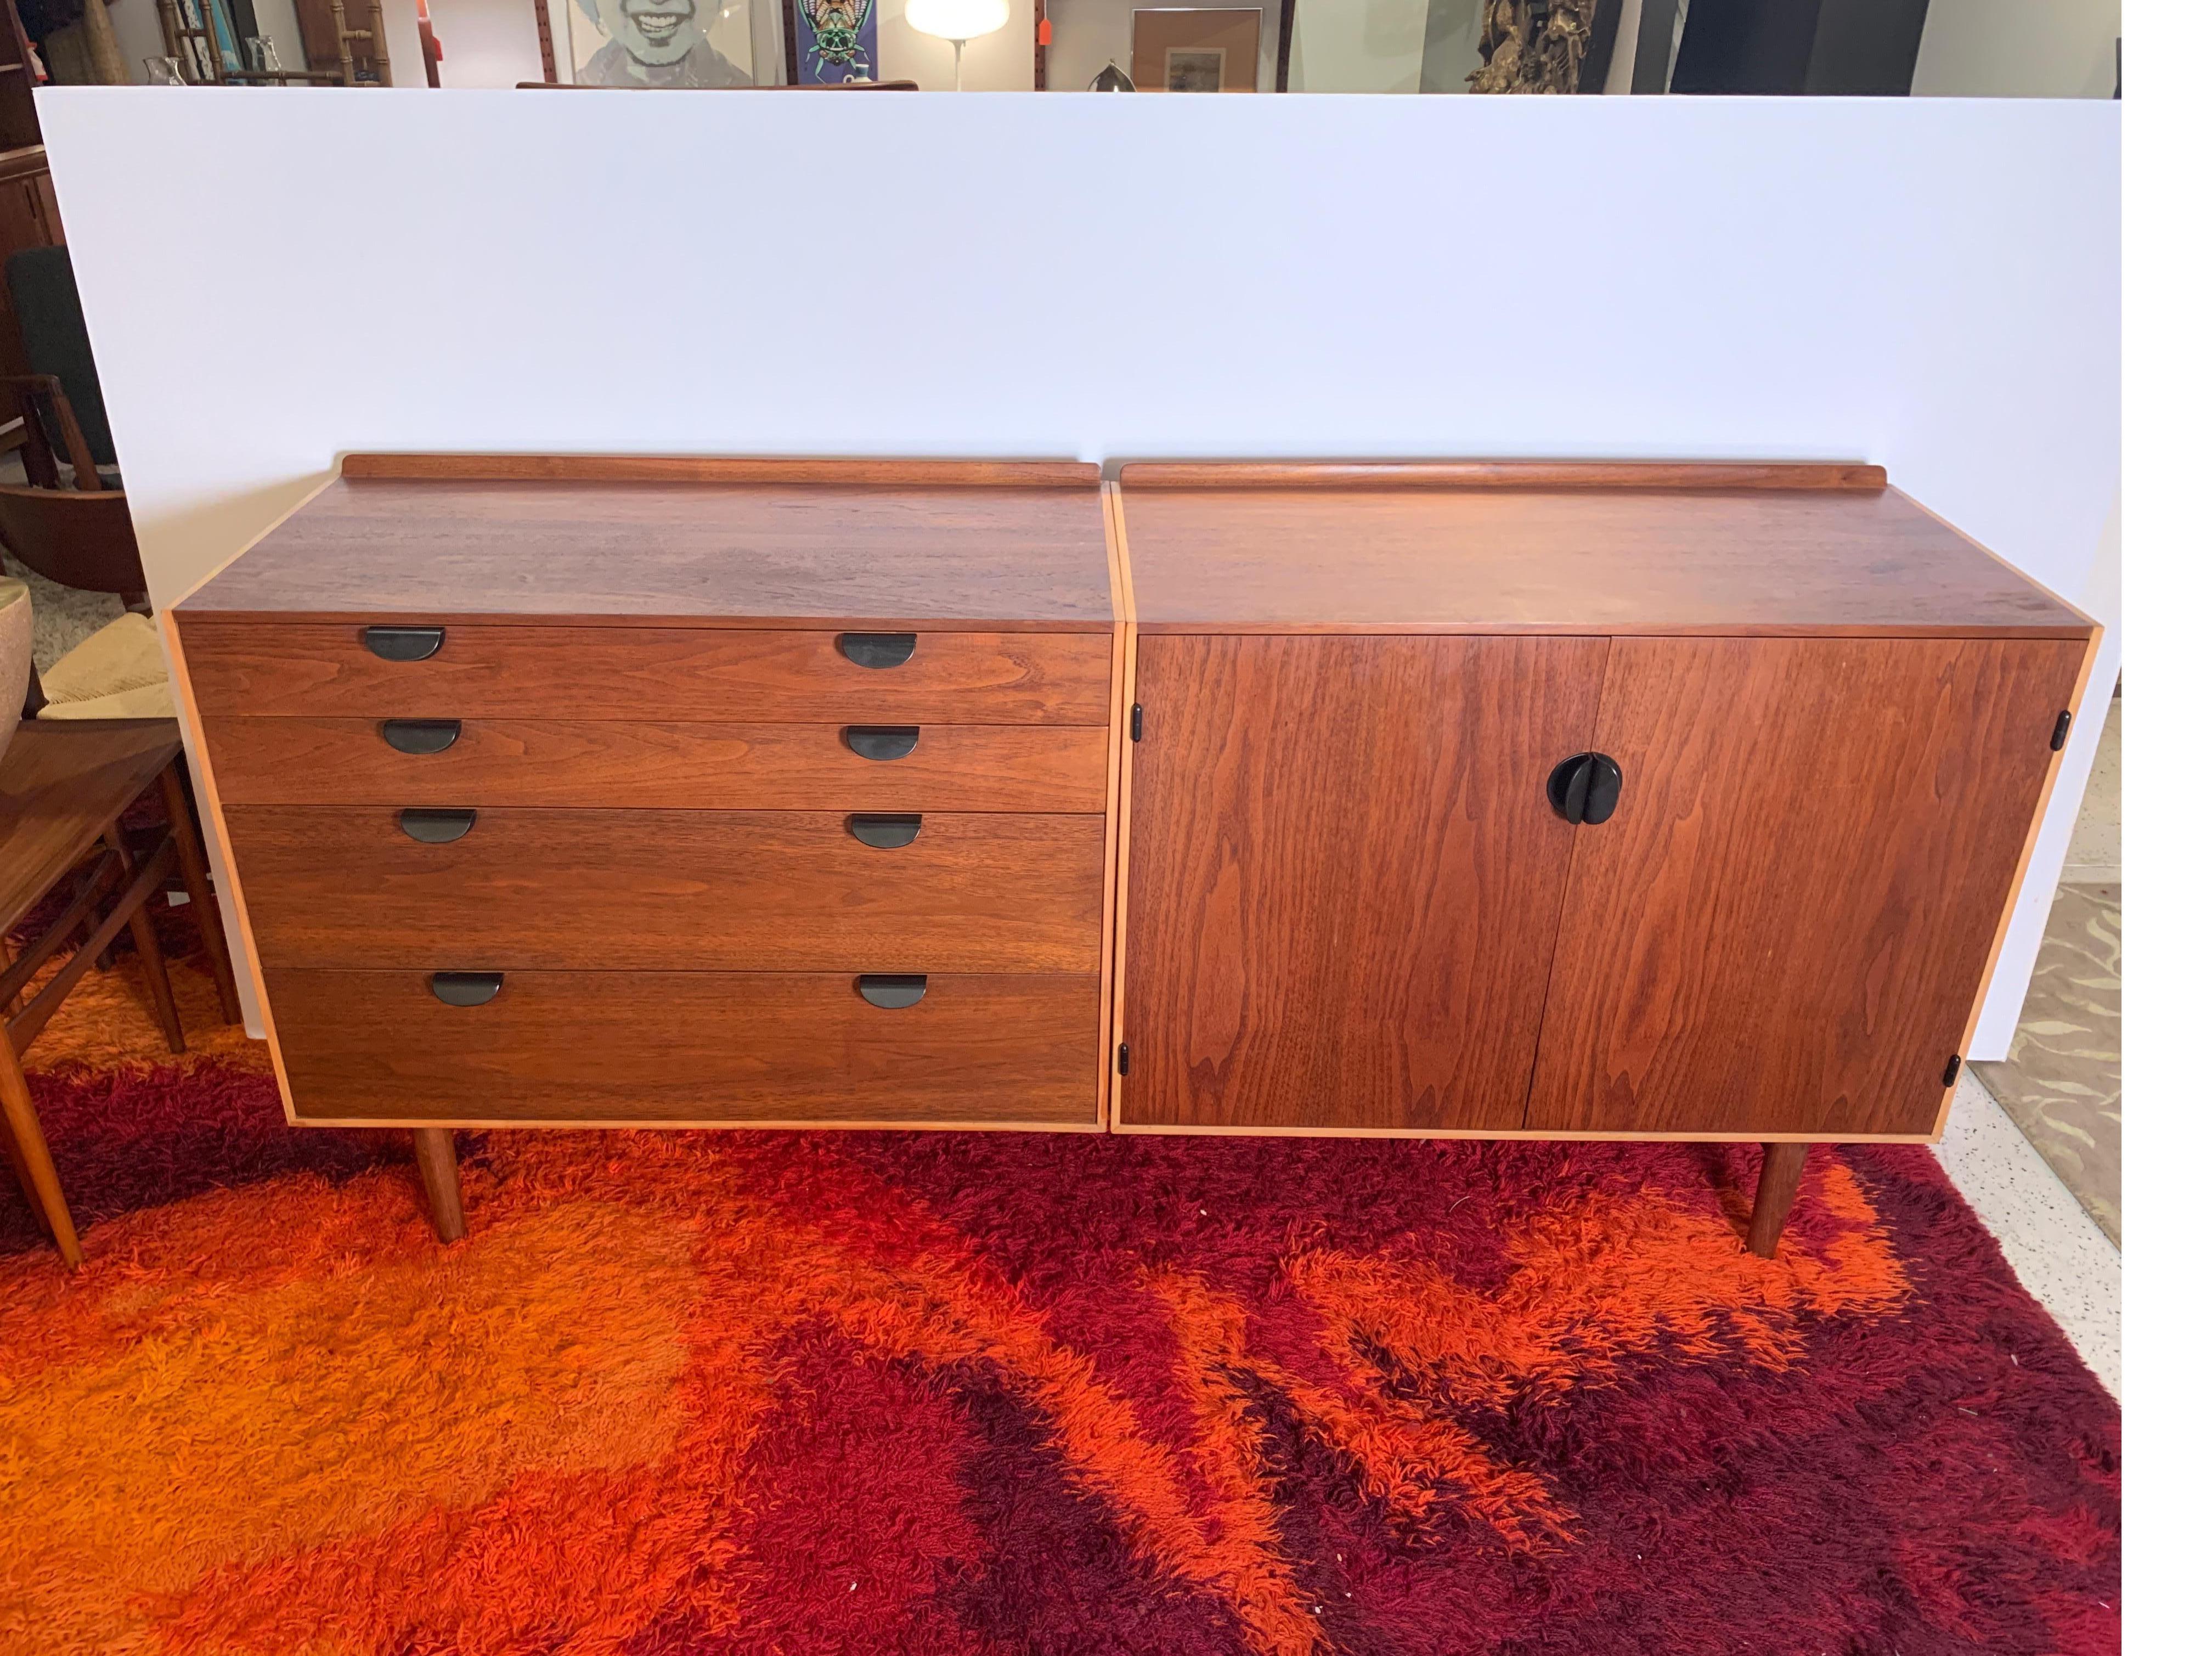 Beautiful and dignified sideboard in maple and teak, designed by Finn Juhl for Baker Furniture Company. Two cabinets, one with four drawers and one with two doors, sit upon a wooden base with tapered legs. Finn Juhl was skeptical that an American